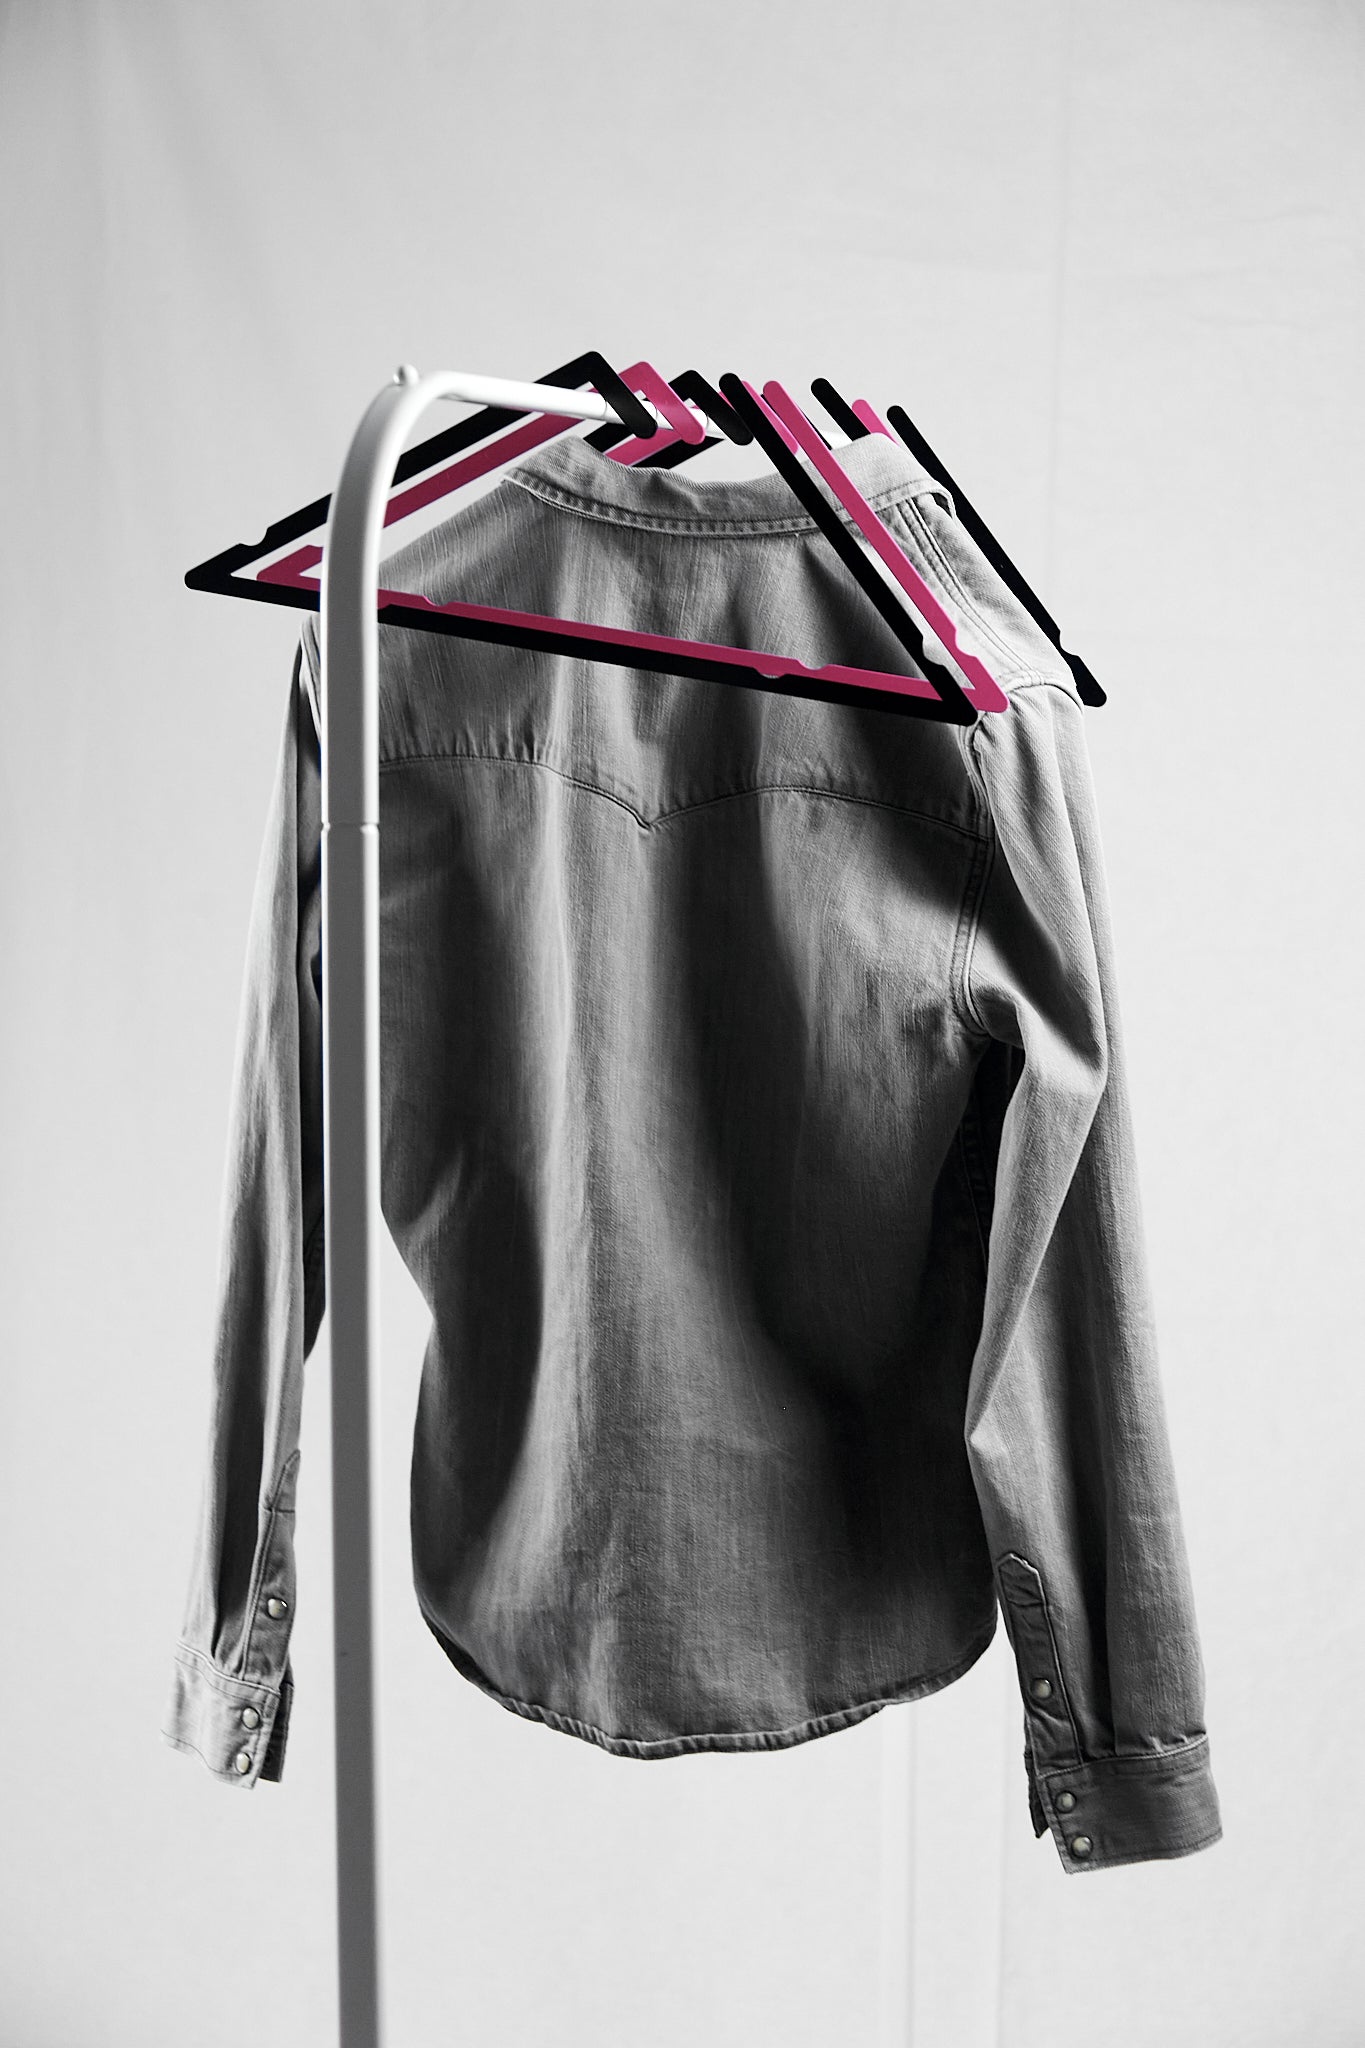 Artistic coat hangers made from recycled steel